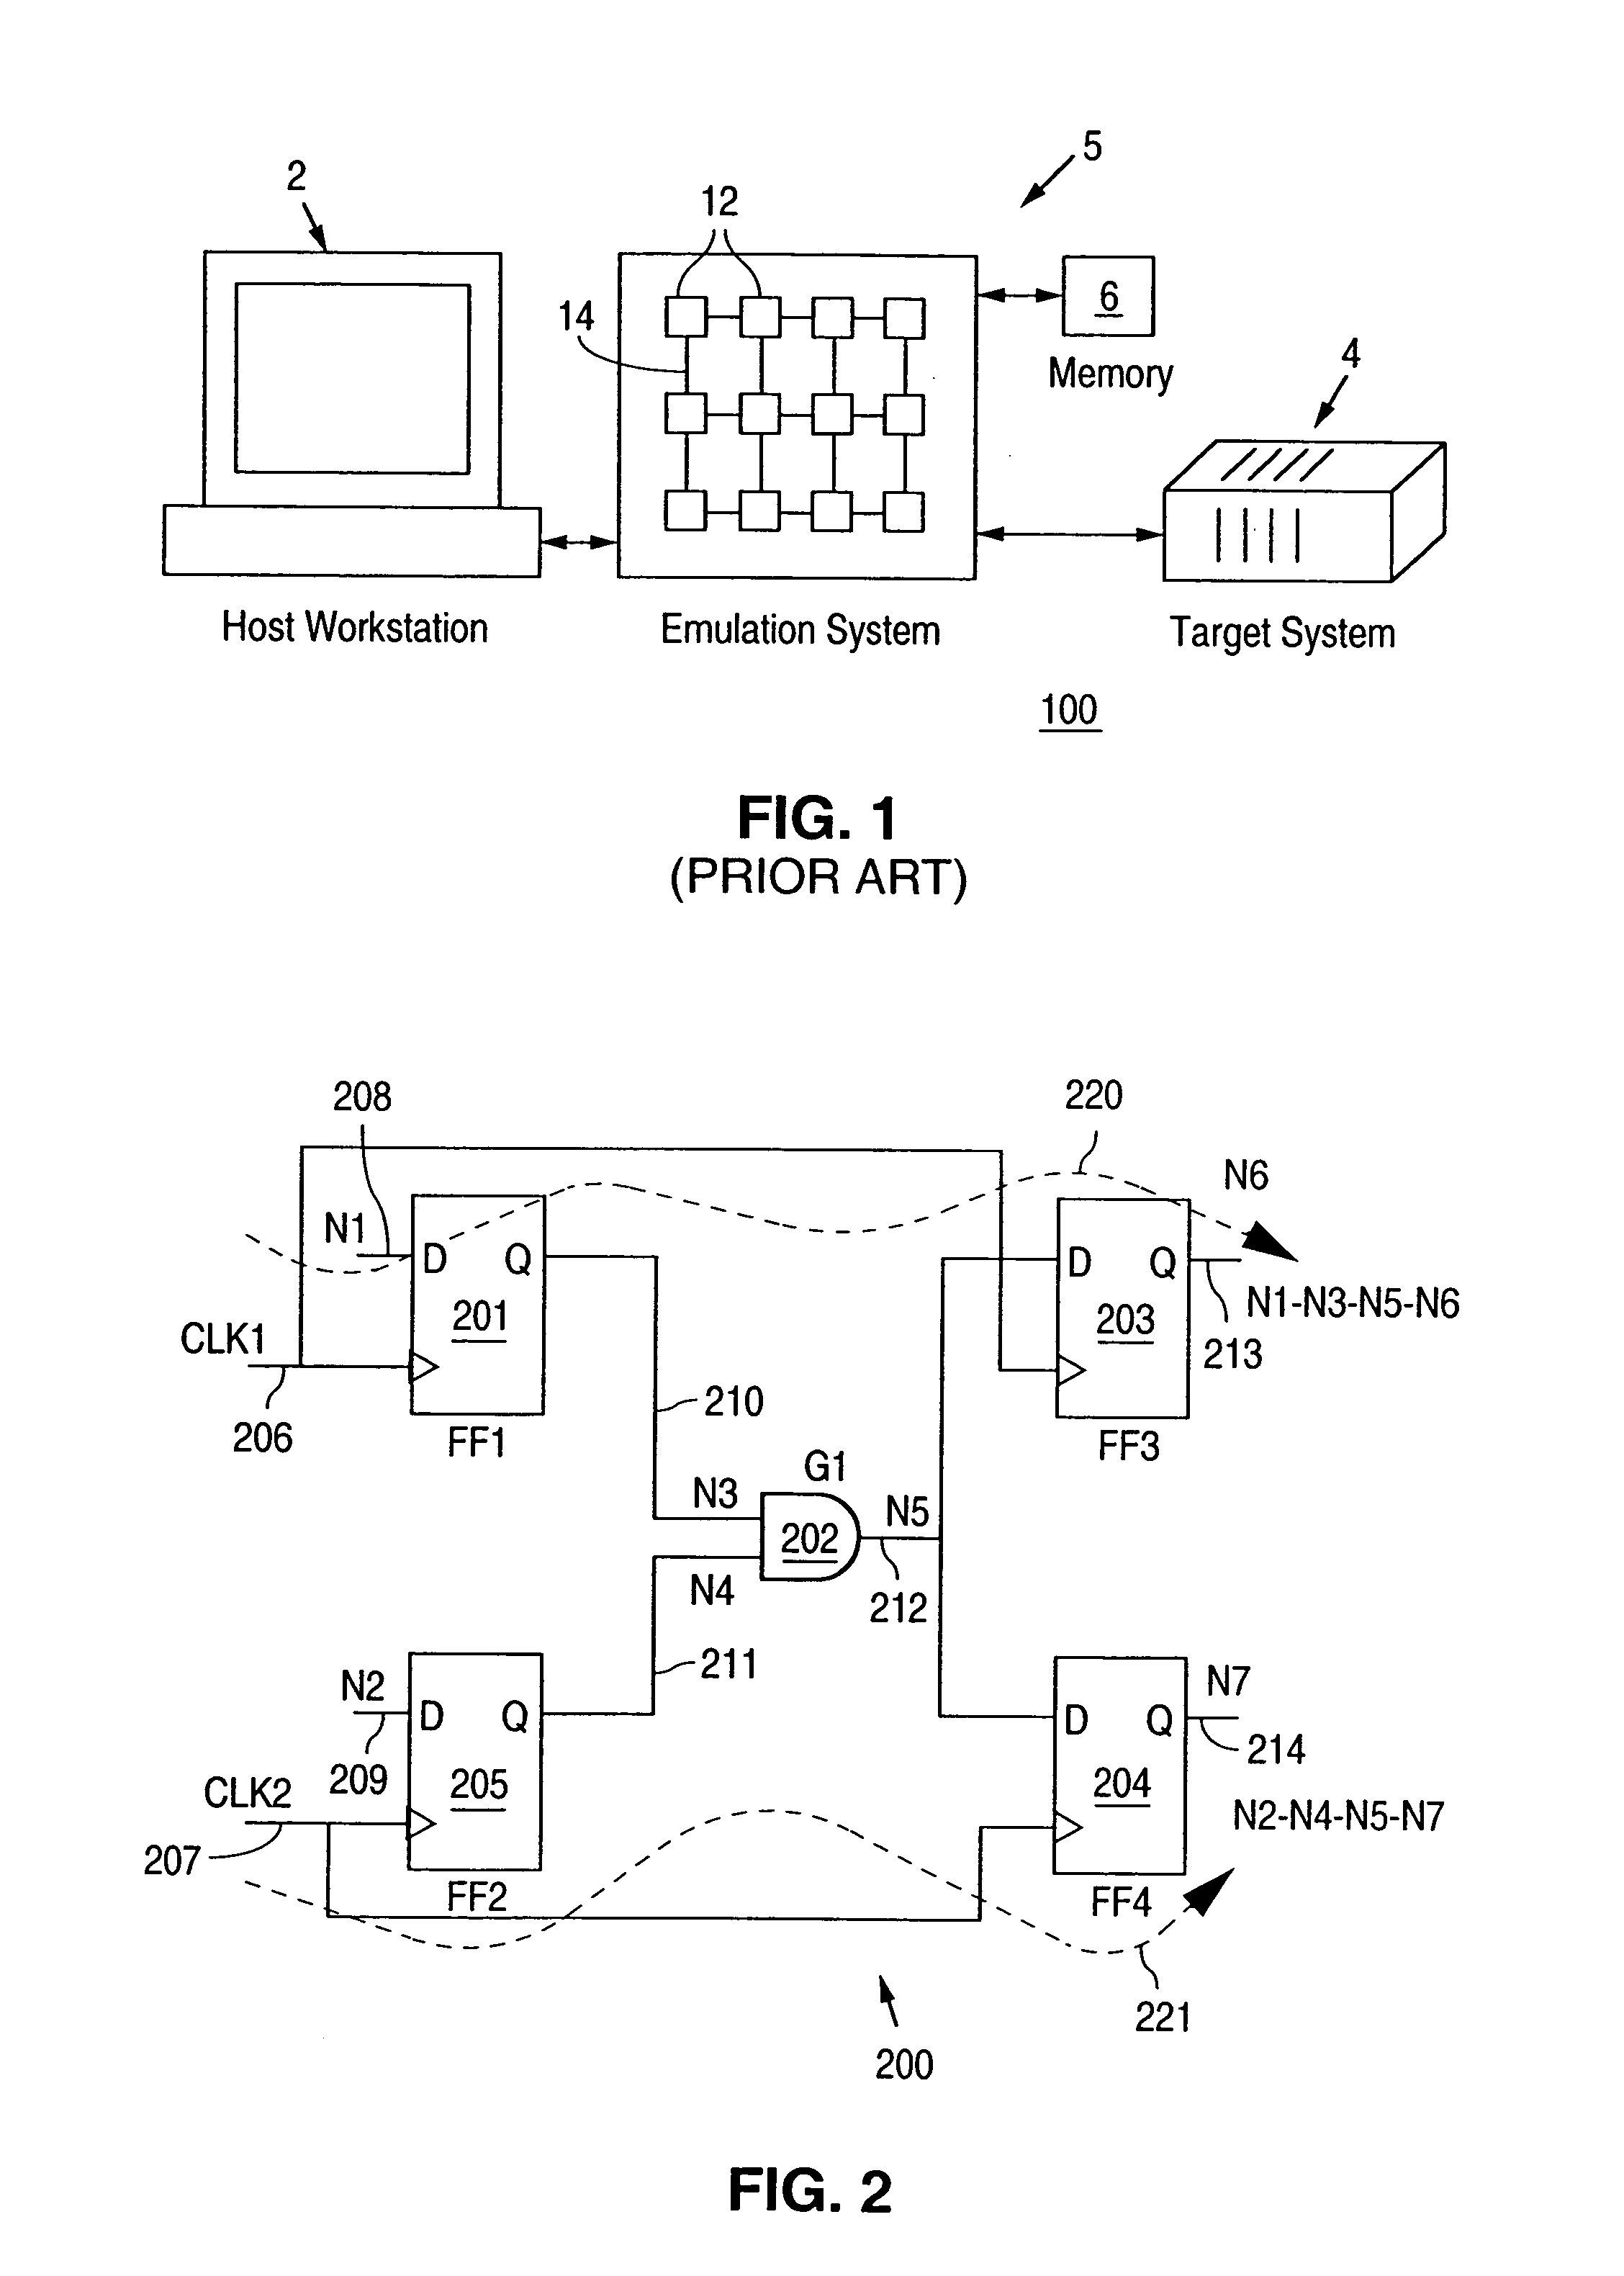 Functional verification of logic and memory circuits with multiple asynchronous domains